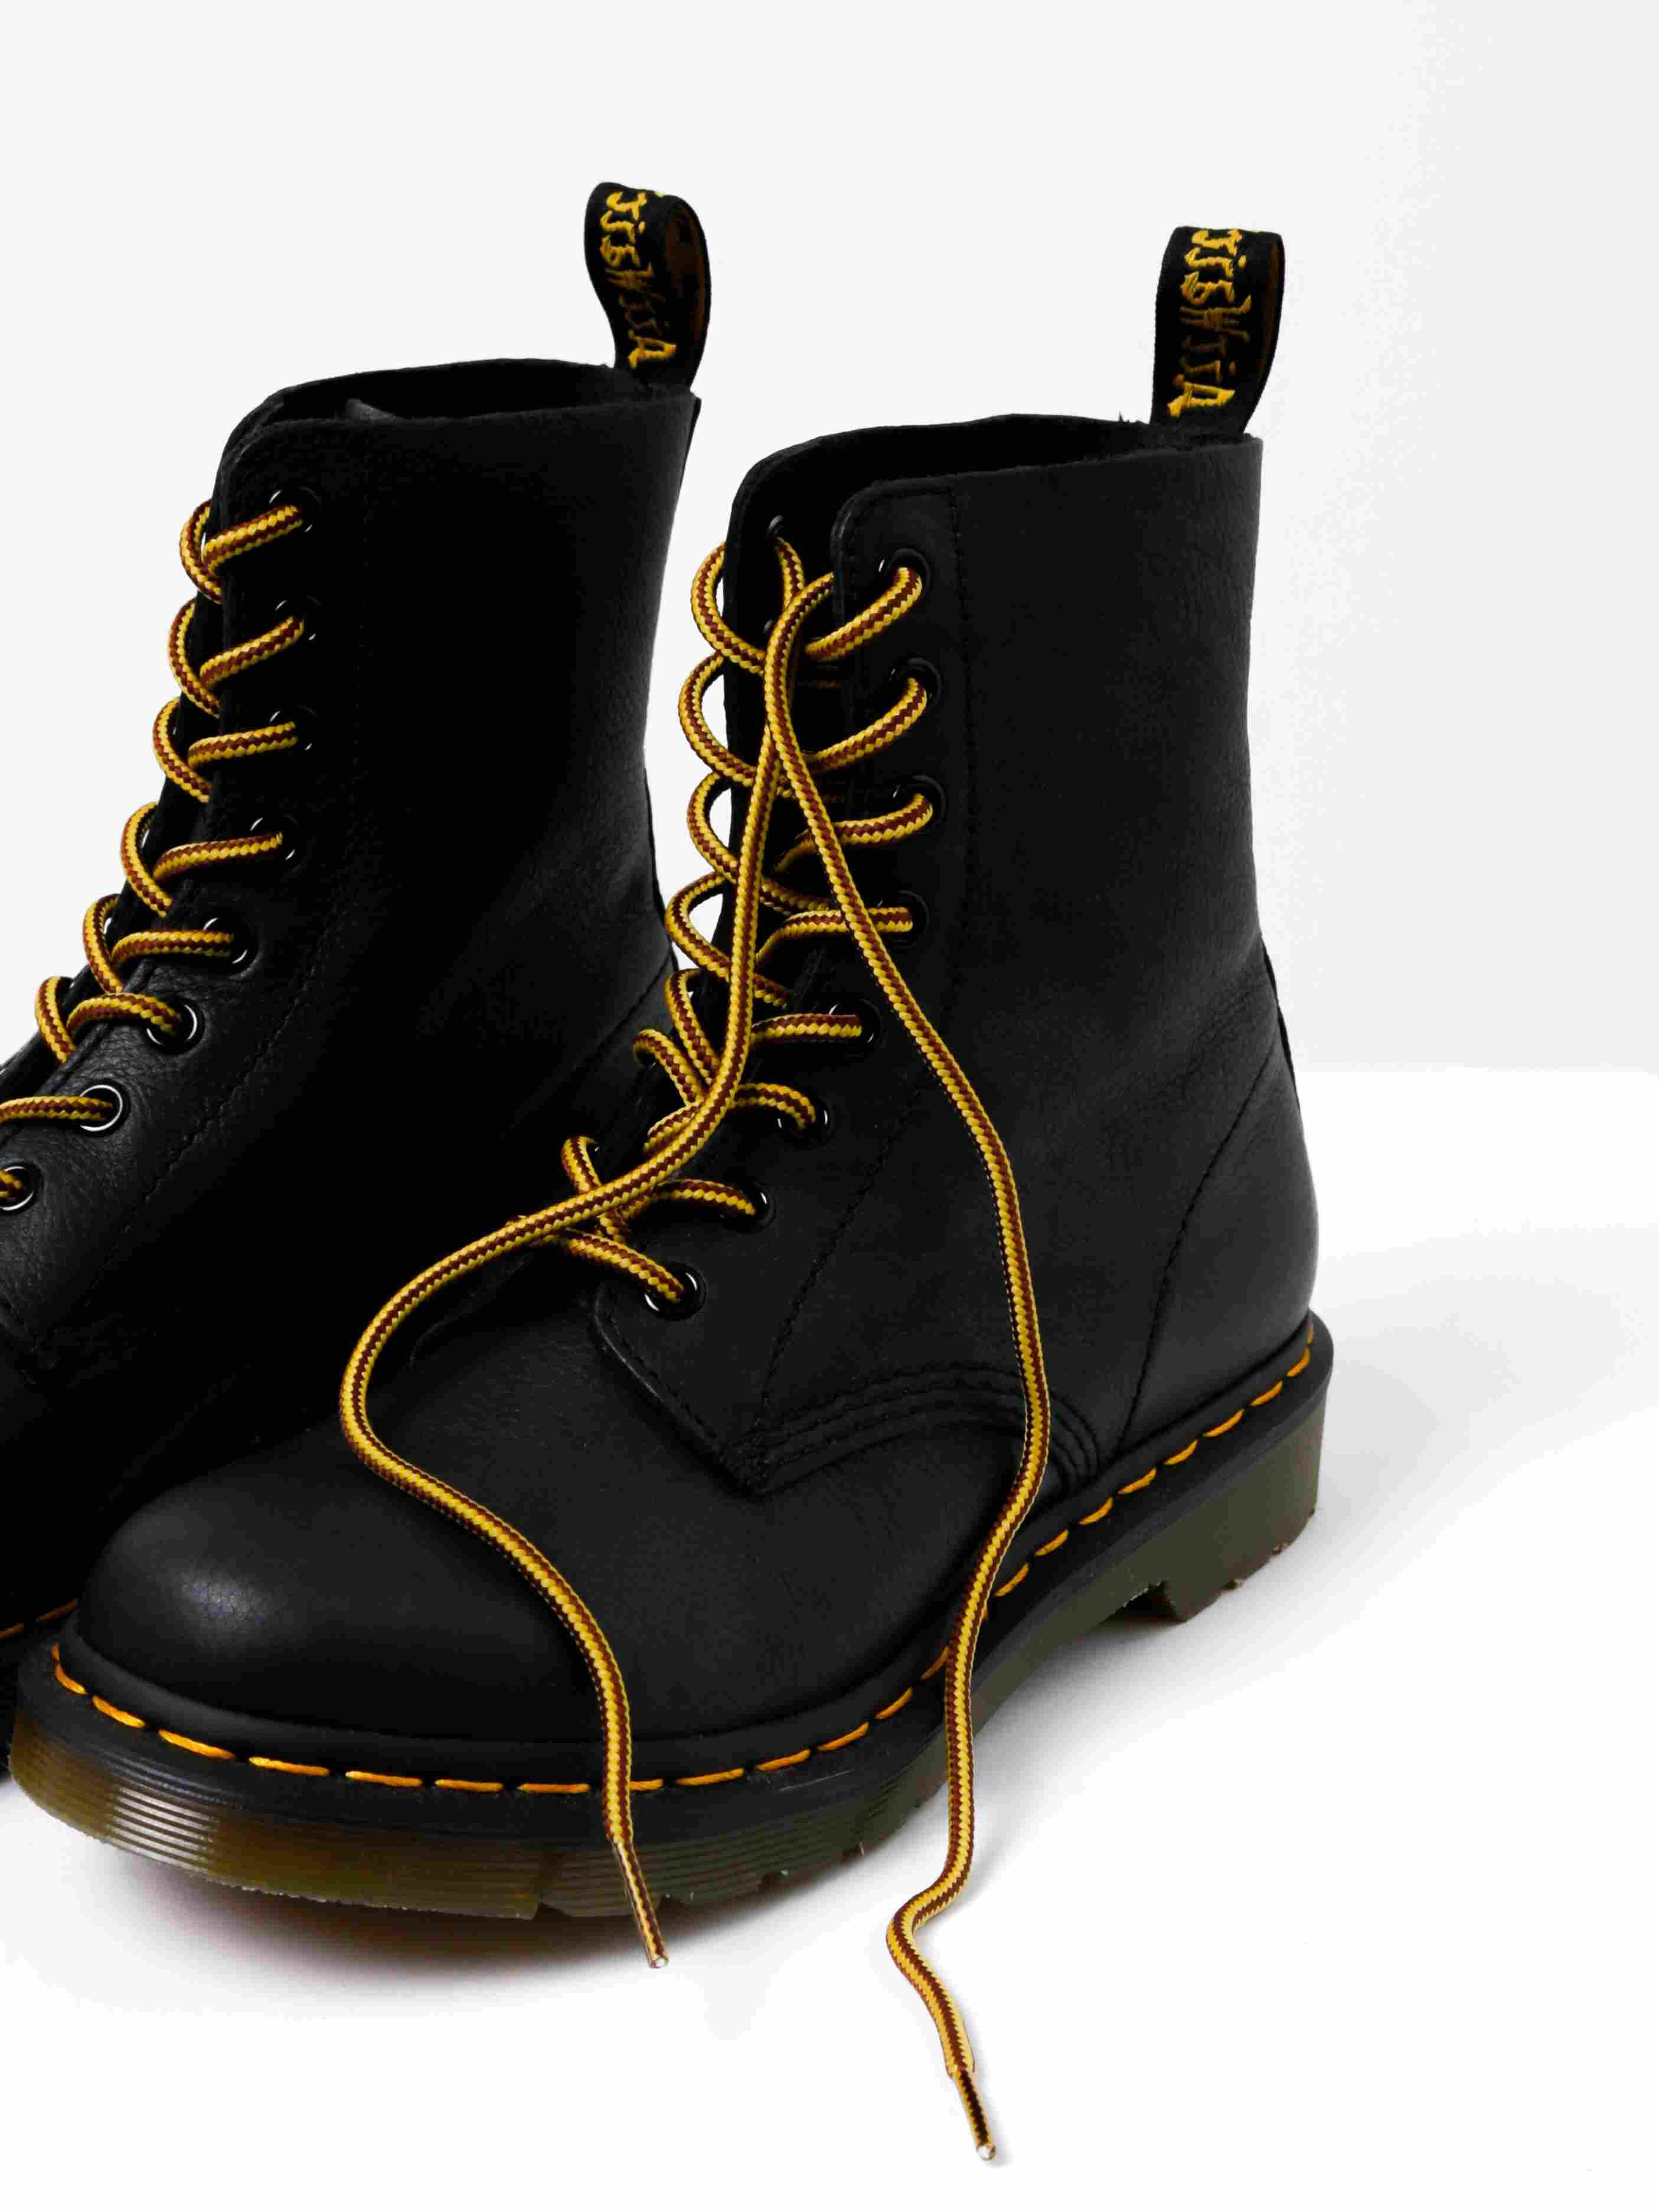 Dr Marten Boot Laces For Sale In Uk View 69 Bargains